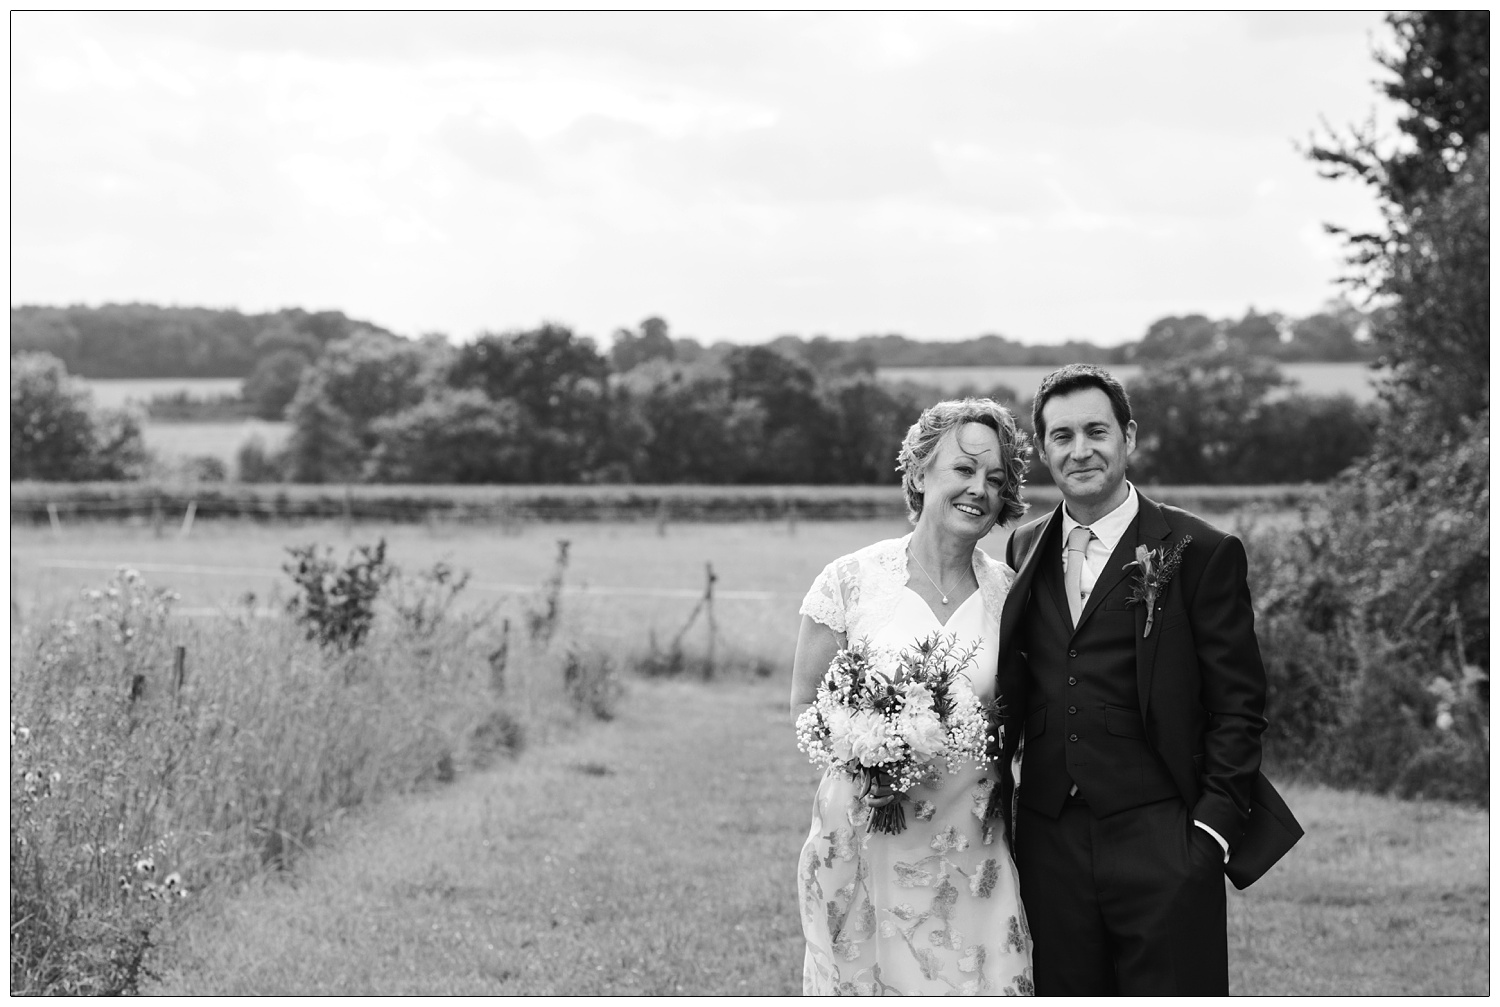 Groom has his hand in his pocket as he stands with his new wife in a grassy lane in the Suffolk countryside.